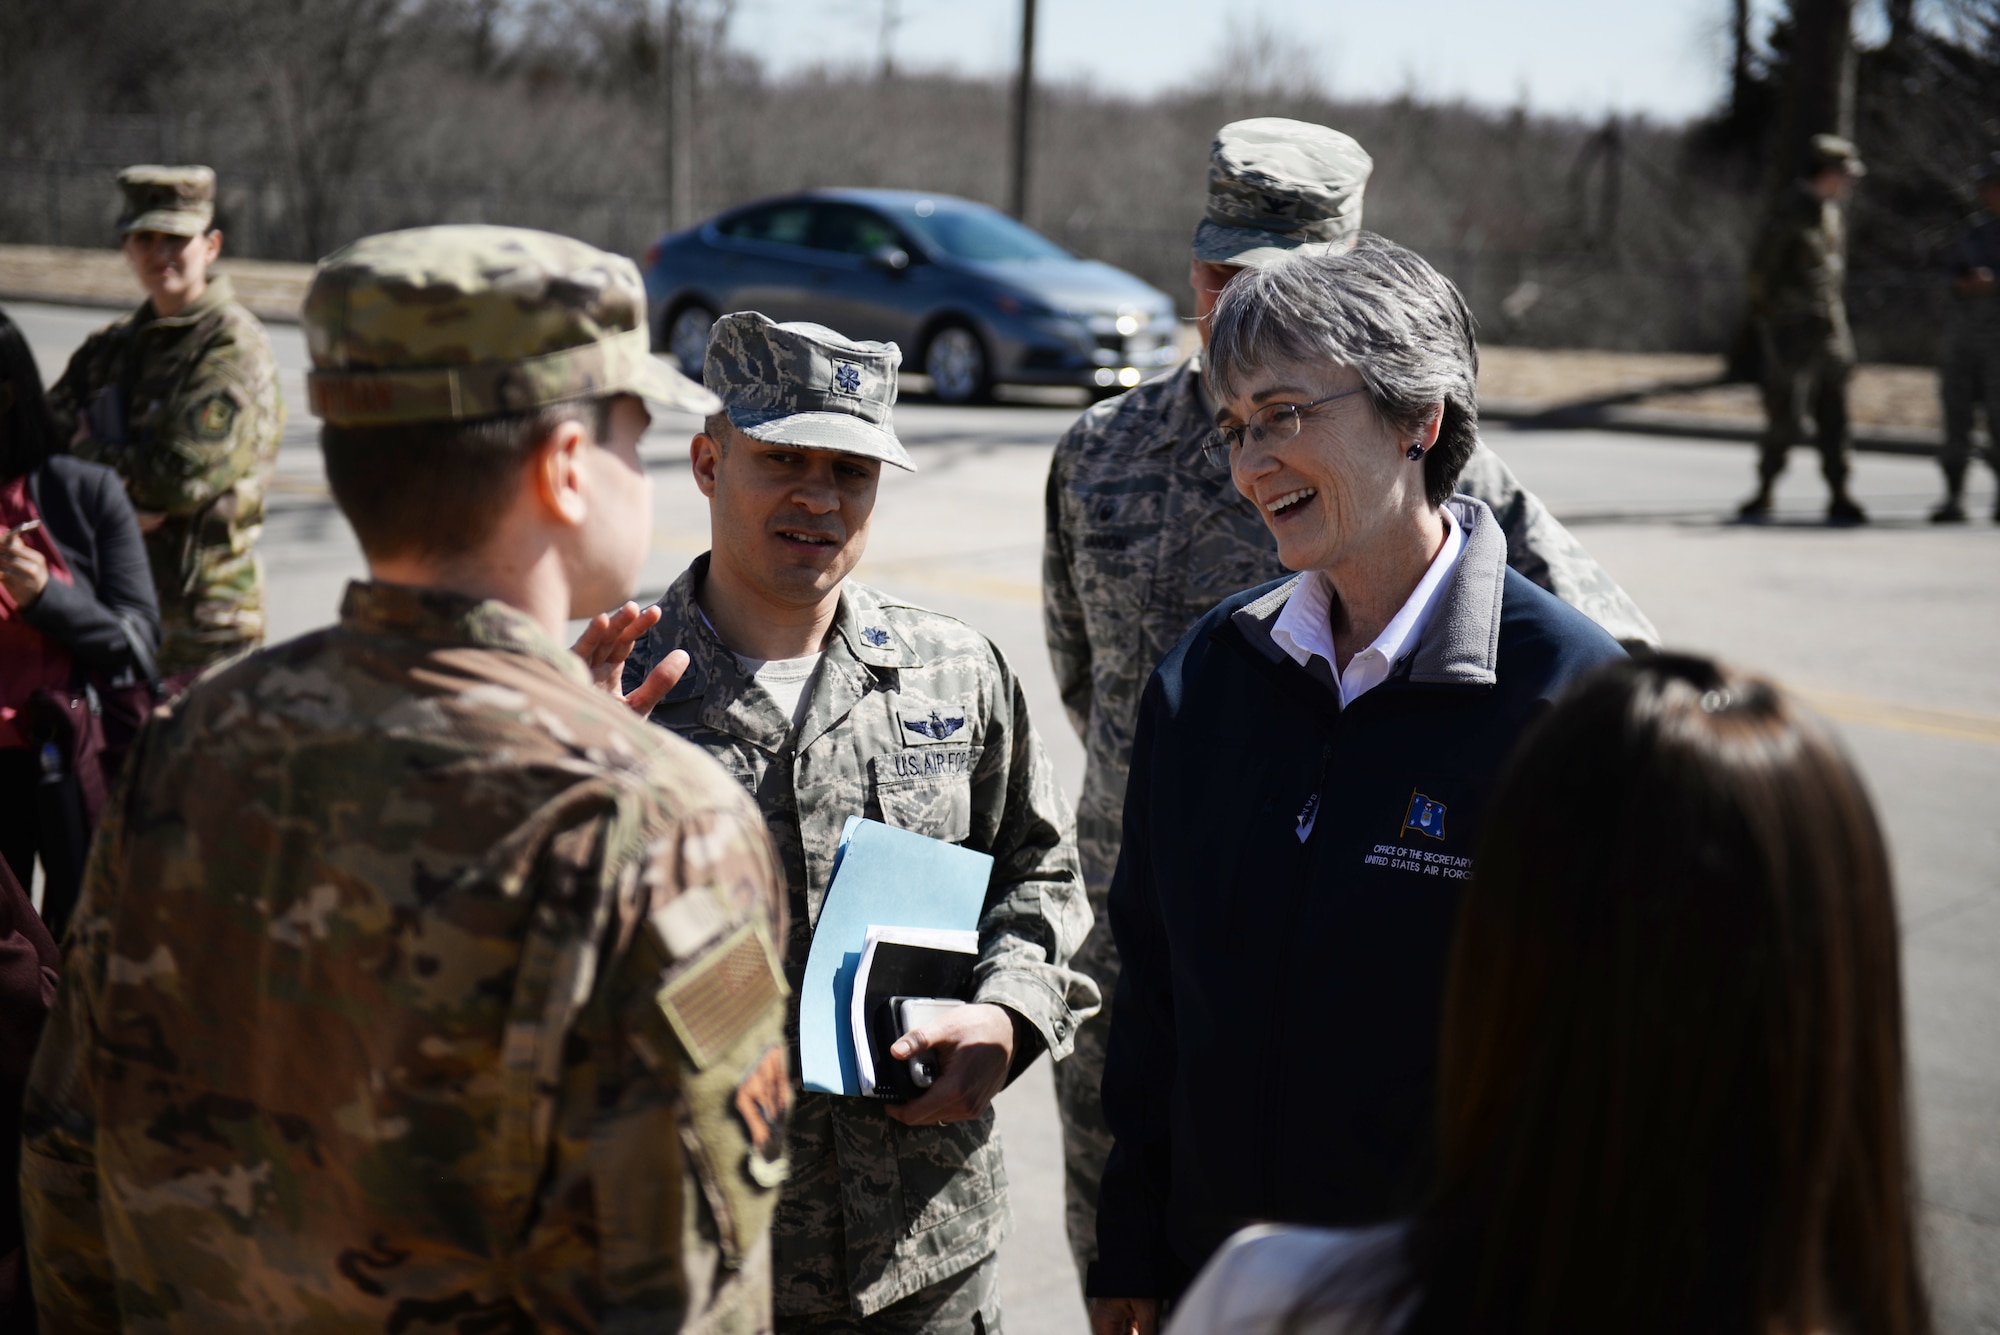 Secretary of the Air Force Heather Wilson talks to members of the 55th Wing March 22, 2019, at Offutt Air Force Base, Nebraska. A week earlier the base began taking on flood waters that eventually covered one-third of the installation. (U.S. Air Force photo by Tech. Sgt. Rachelle Blake)